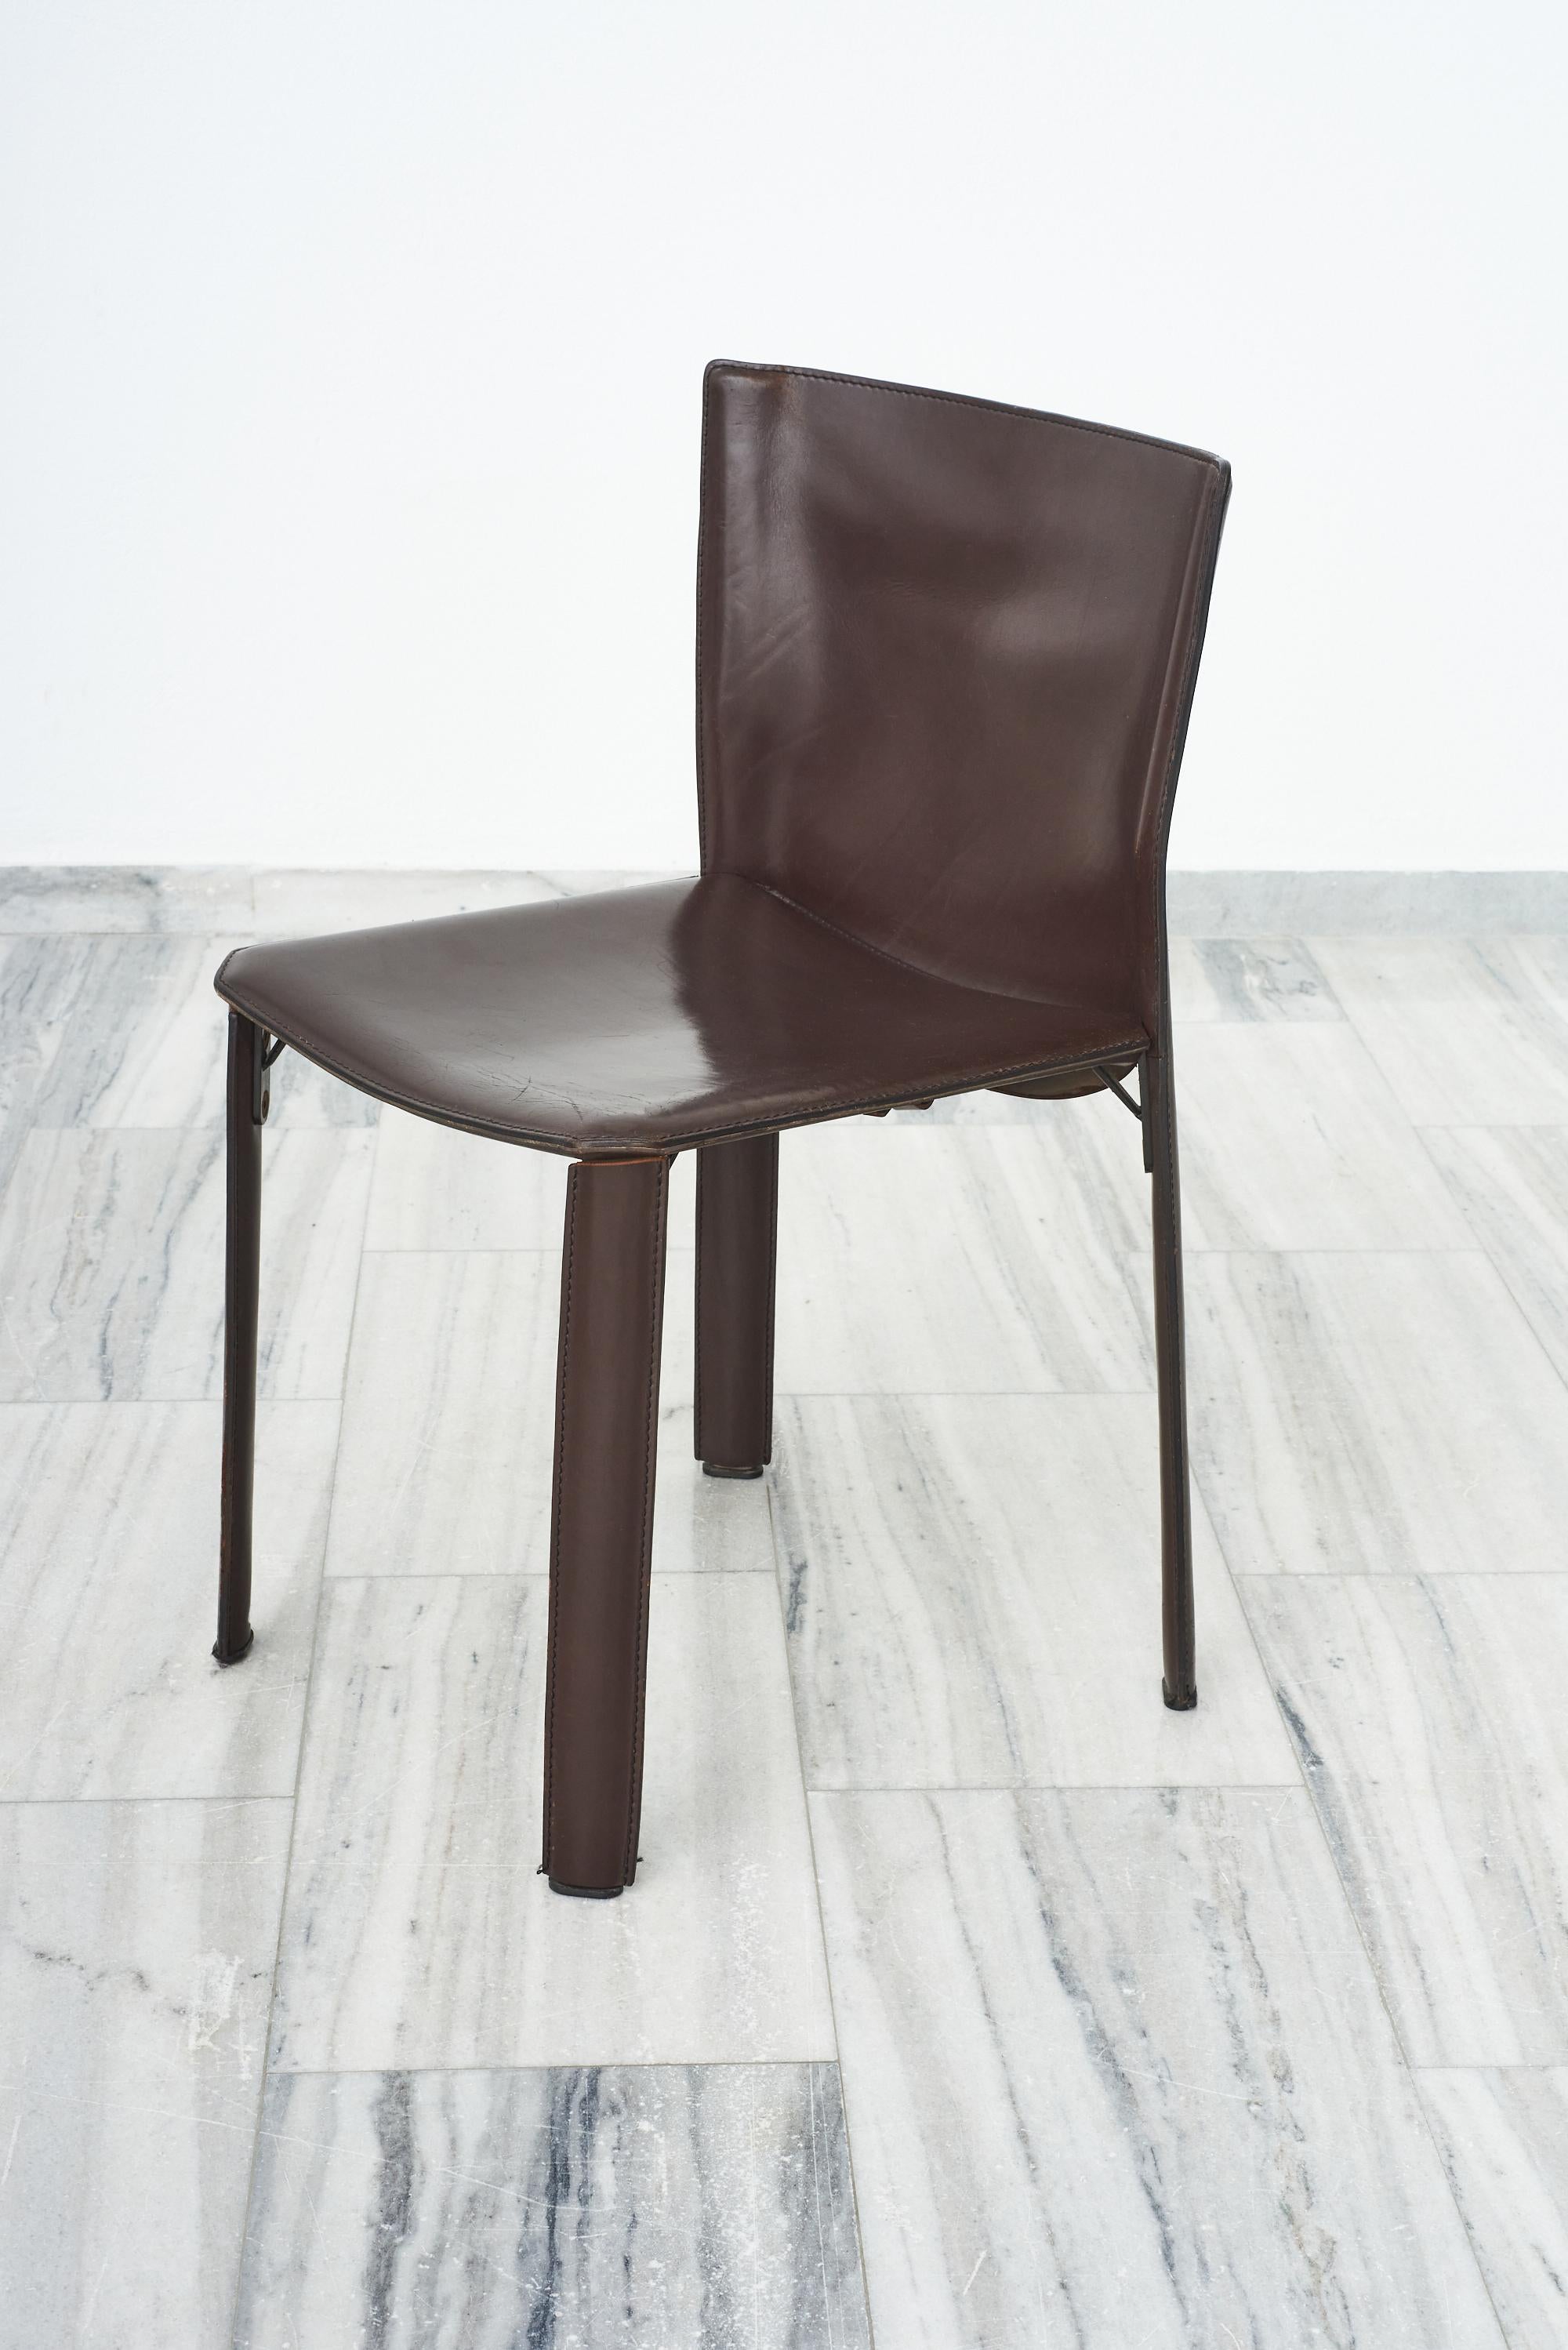 Set of 5 dark chocolate saddle leather dining chairs with leather straps under the seats.